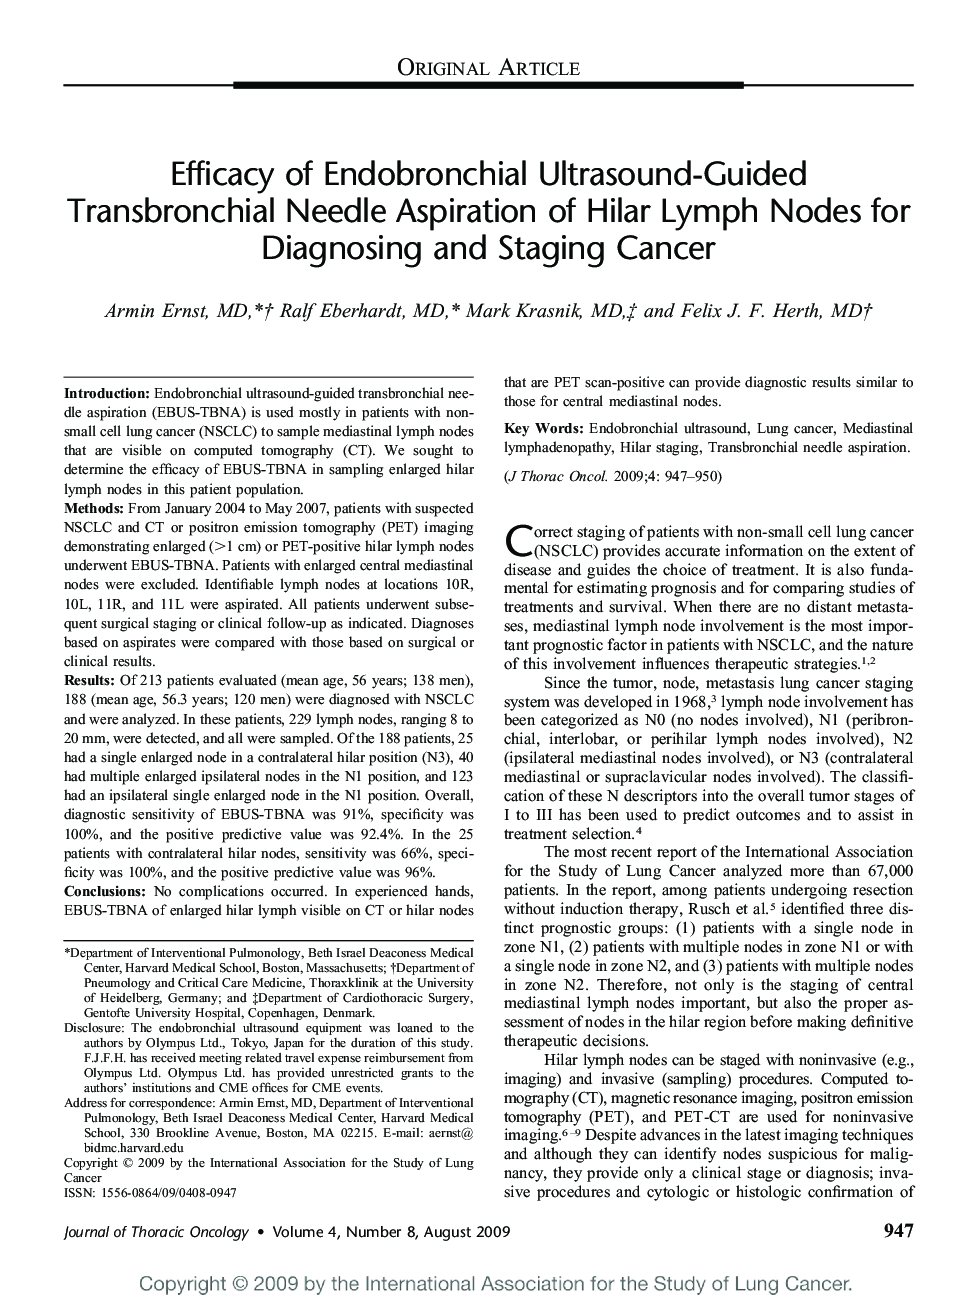 Efficacy of Endobronchial Ultrasound-Guided Transbronchial Needle Aspiration of Hilar Lymph Nodes for Diagnosing and Staging Cancer